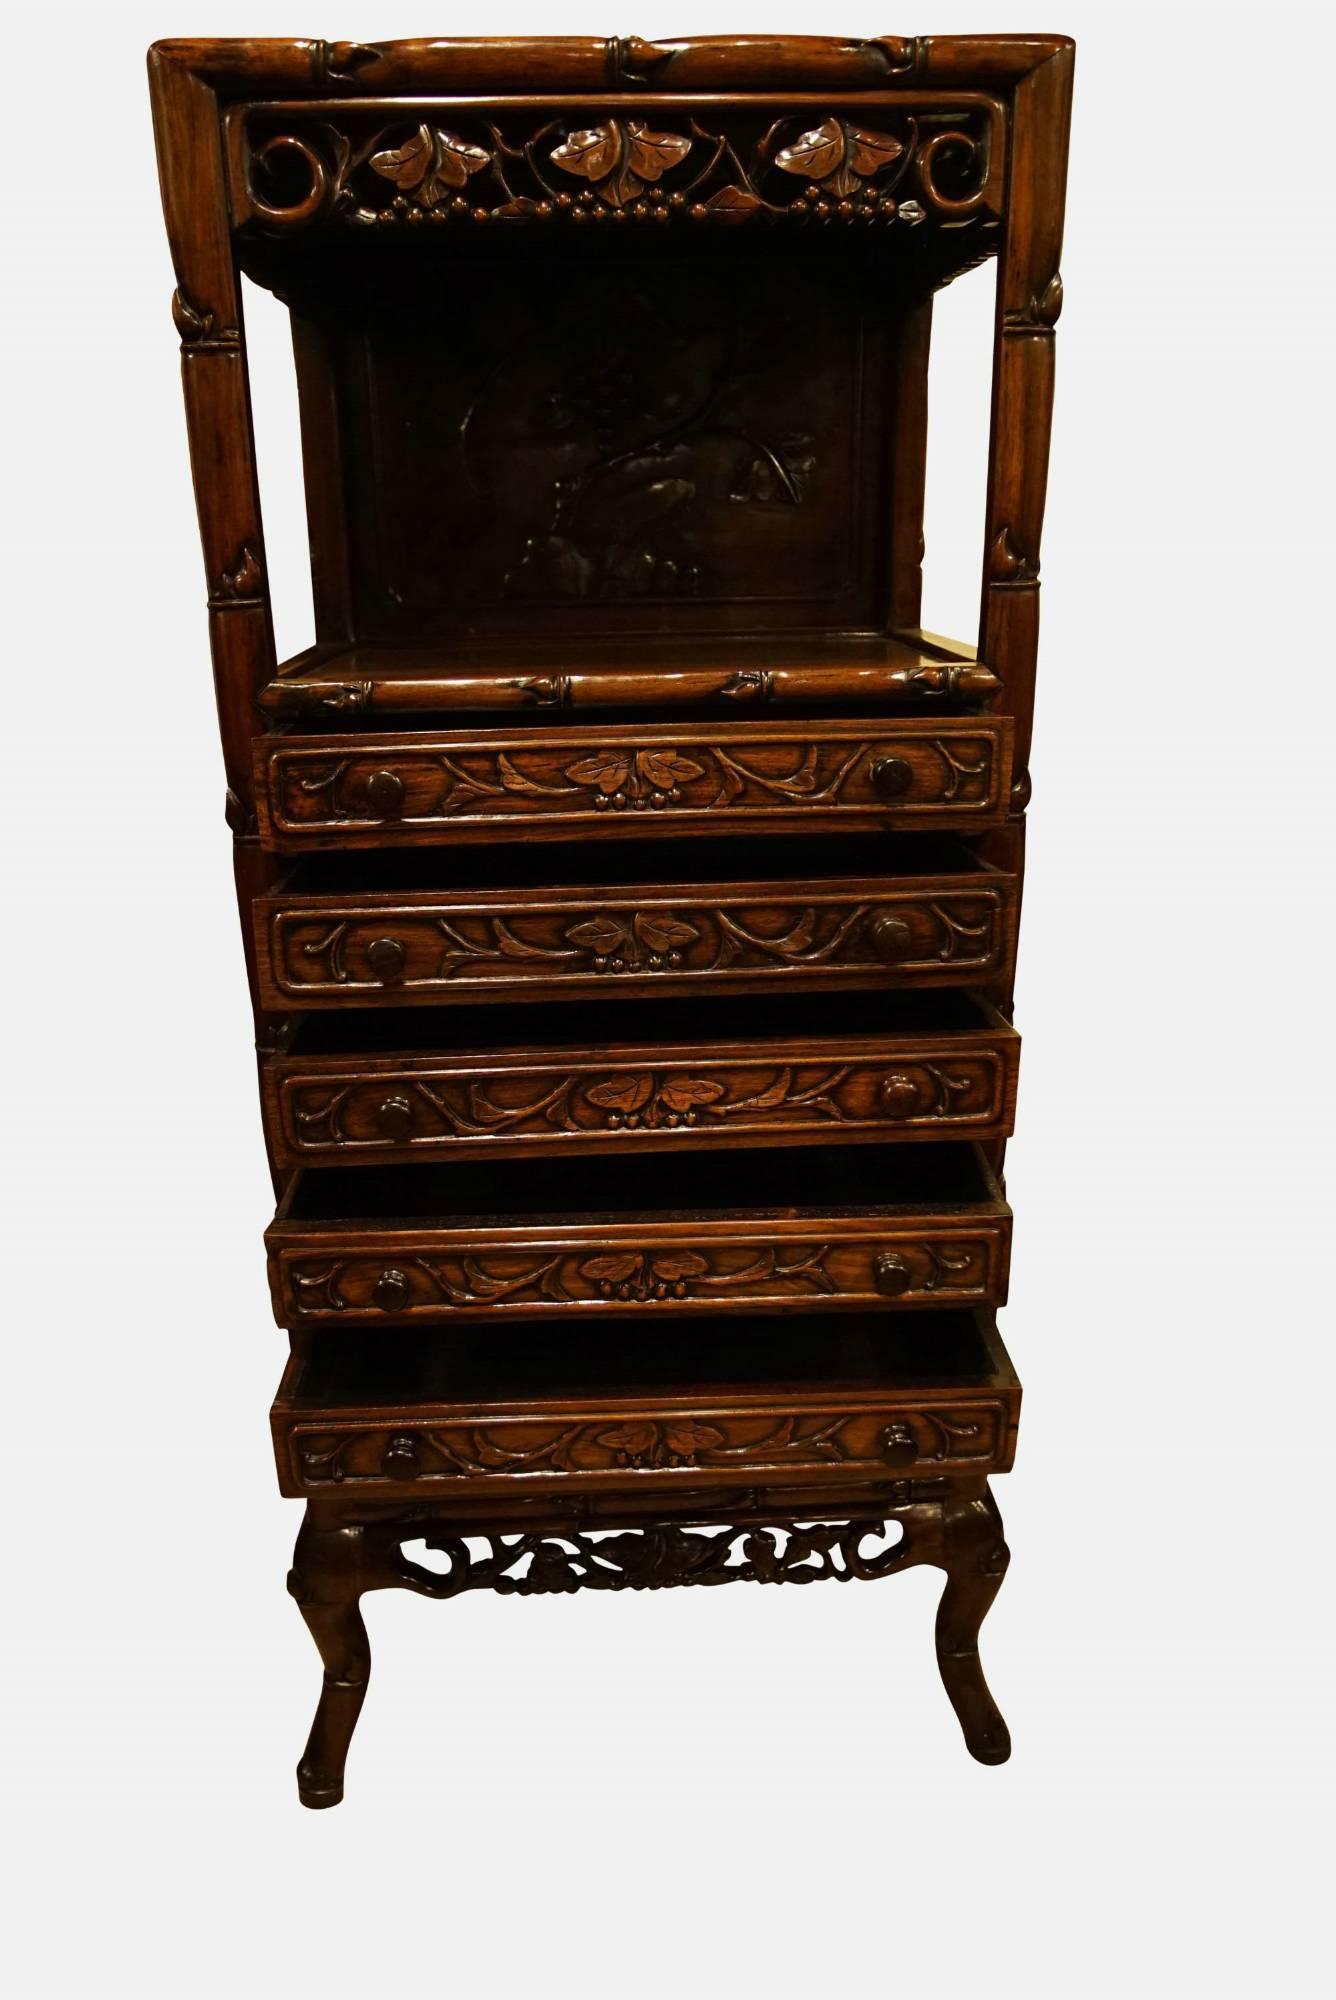 A 19th century Chinese hardwood cabinet/chest,

circa 1880.
 